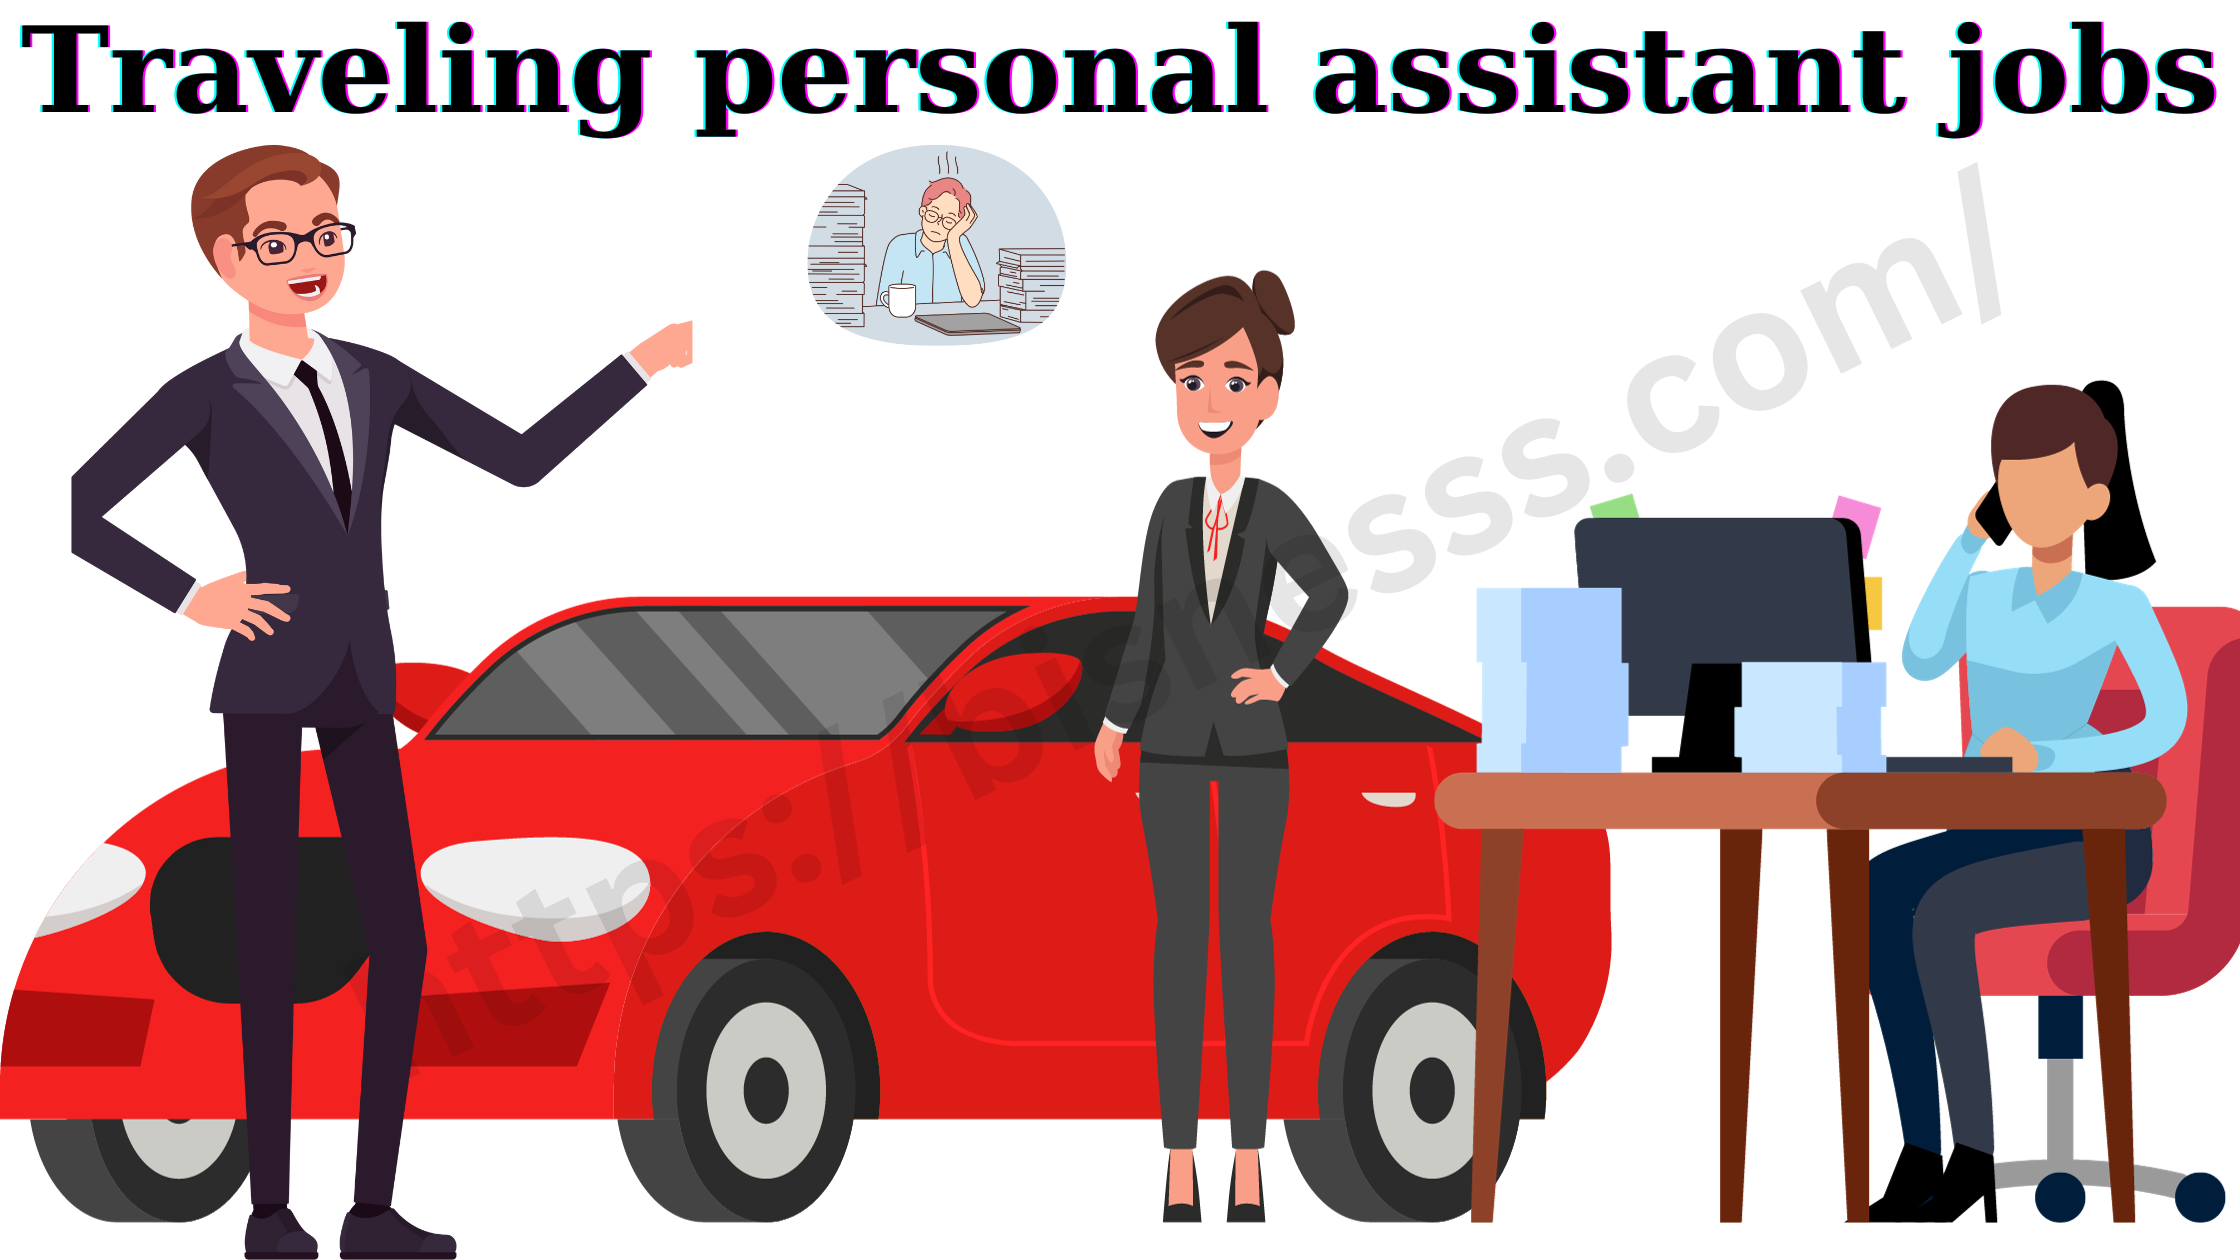 Traveling personal assistant jobs